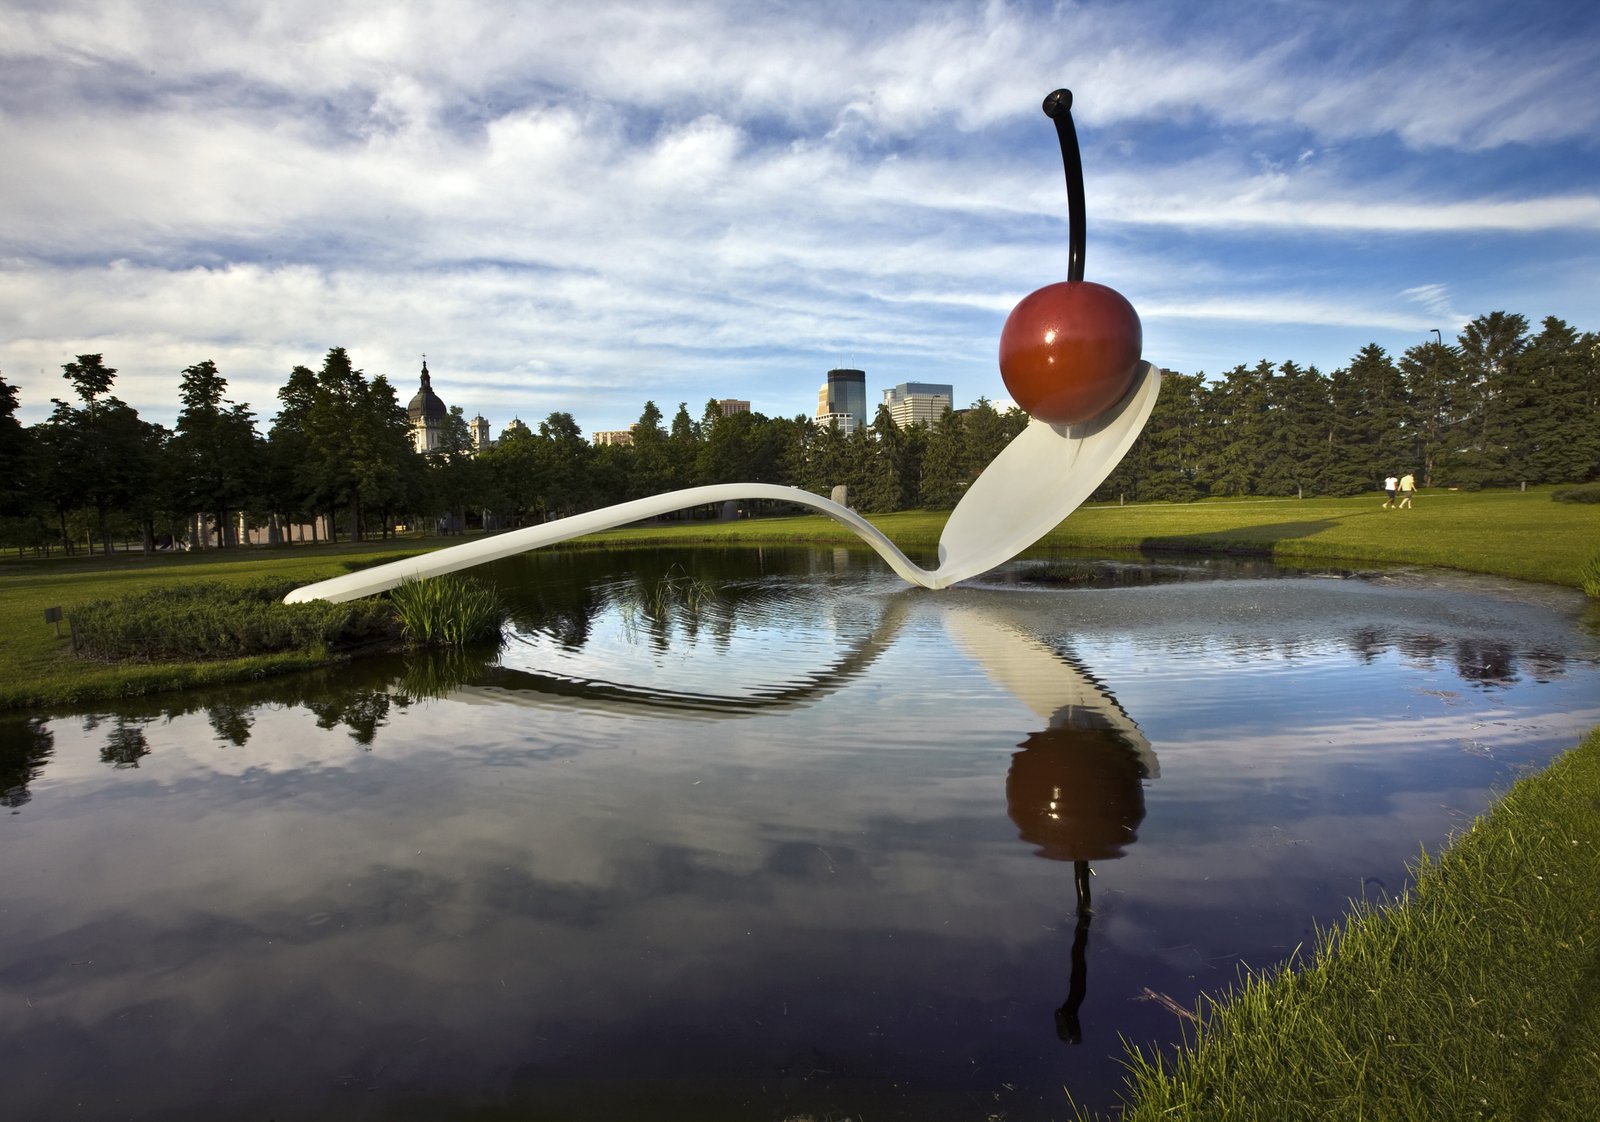 Claes Oldenburg, Who Transformed Everyday Objects Into Towering Sculptures, Dies at 93 | Smart News